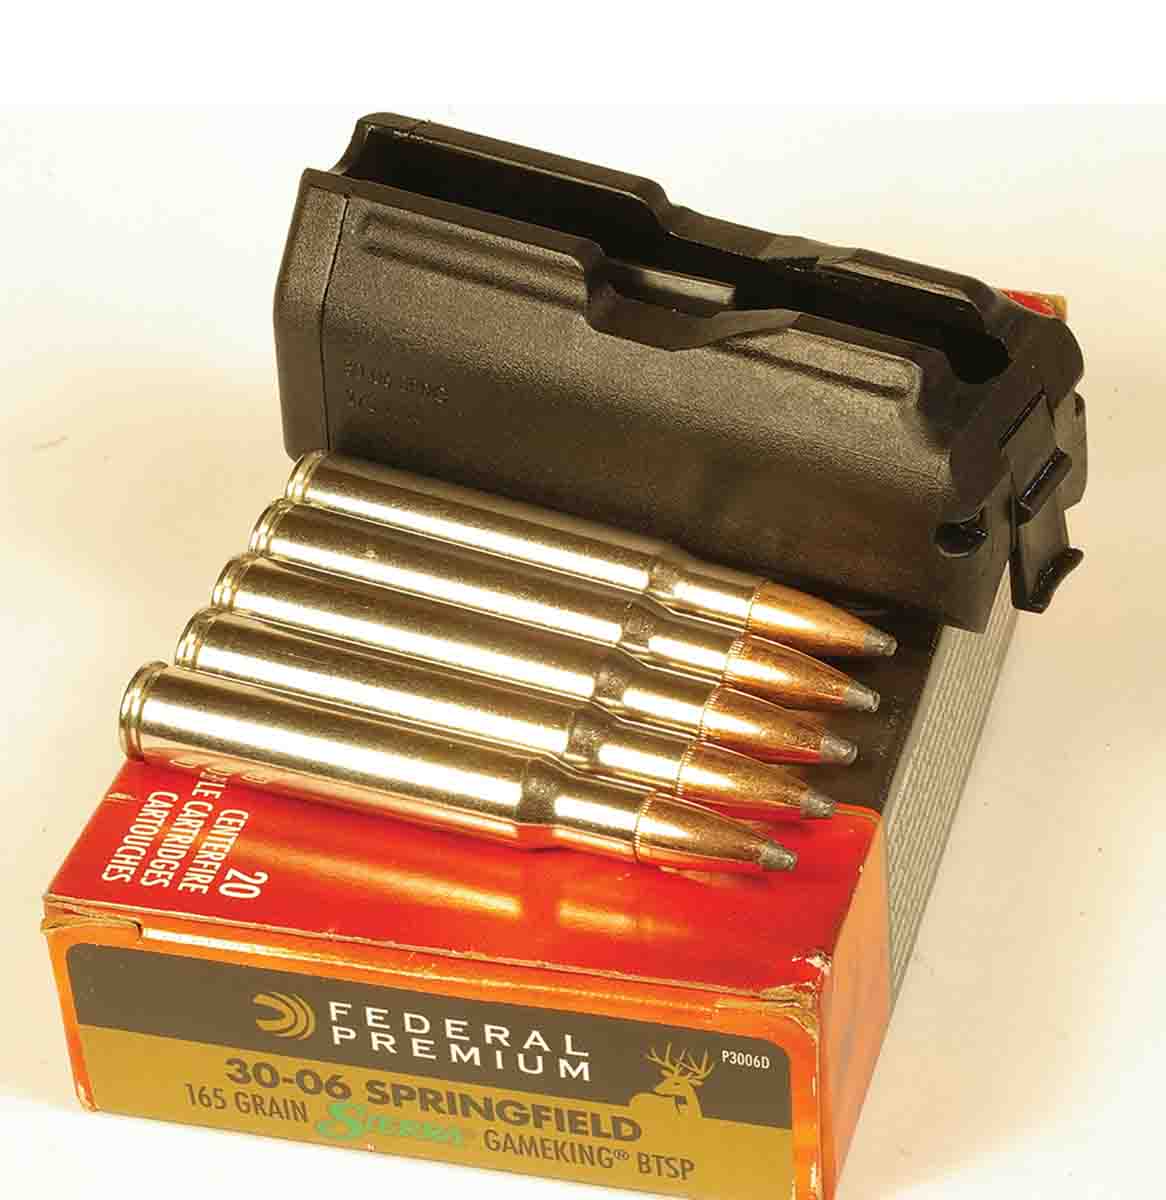 The Compass magazine holds five .30-06 cartridges.